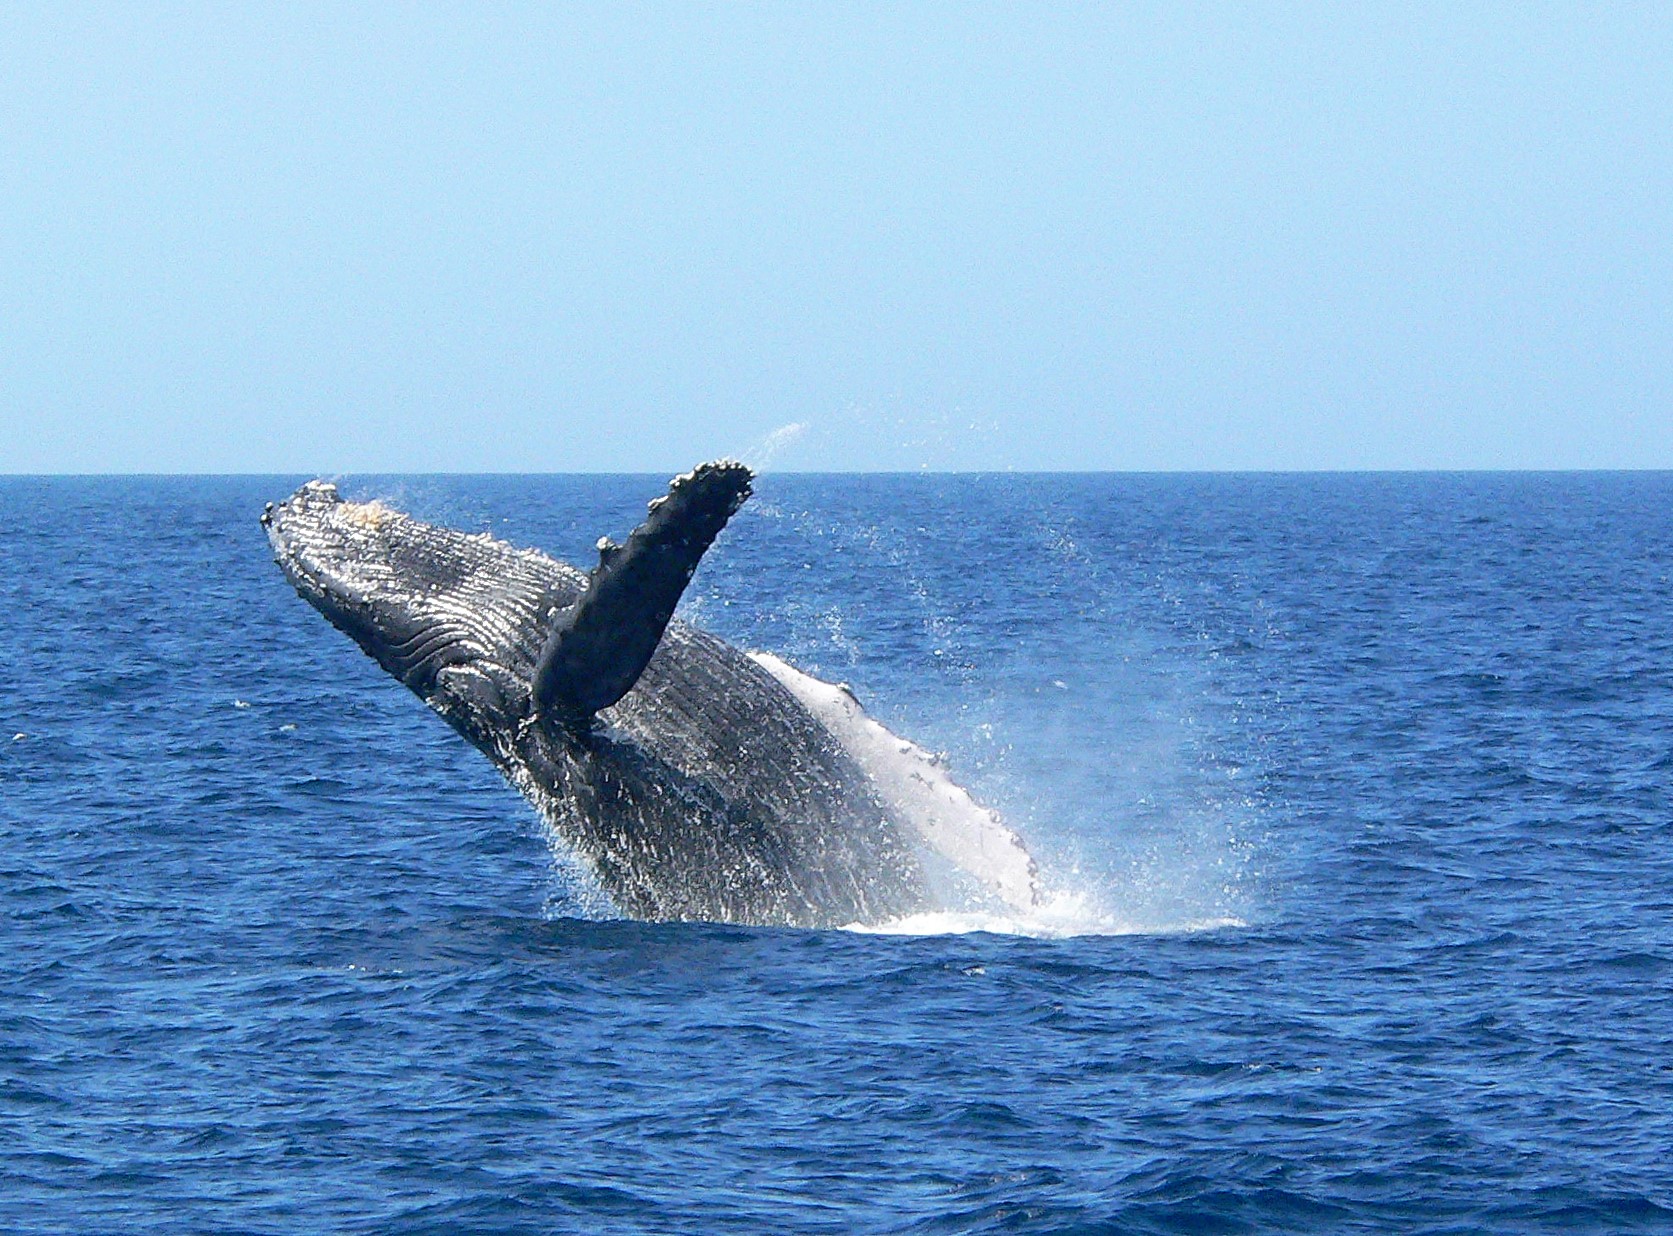  Whale Watching in Okinawa (Naha Departure)